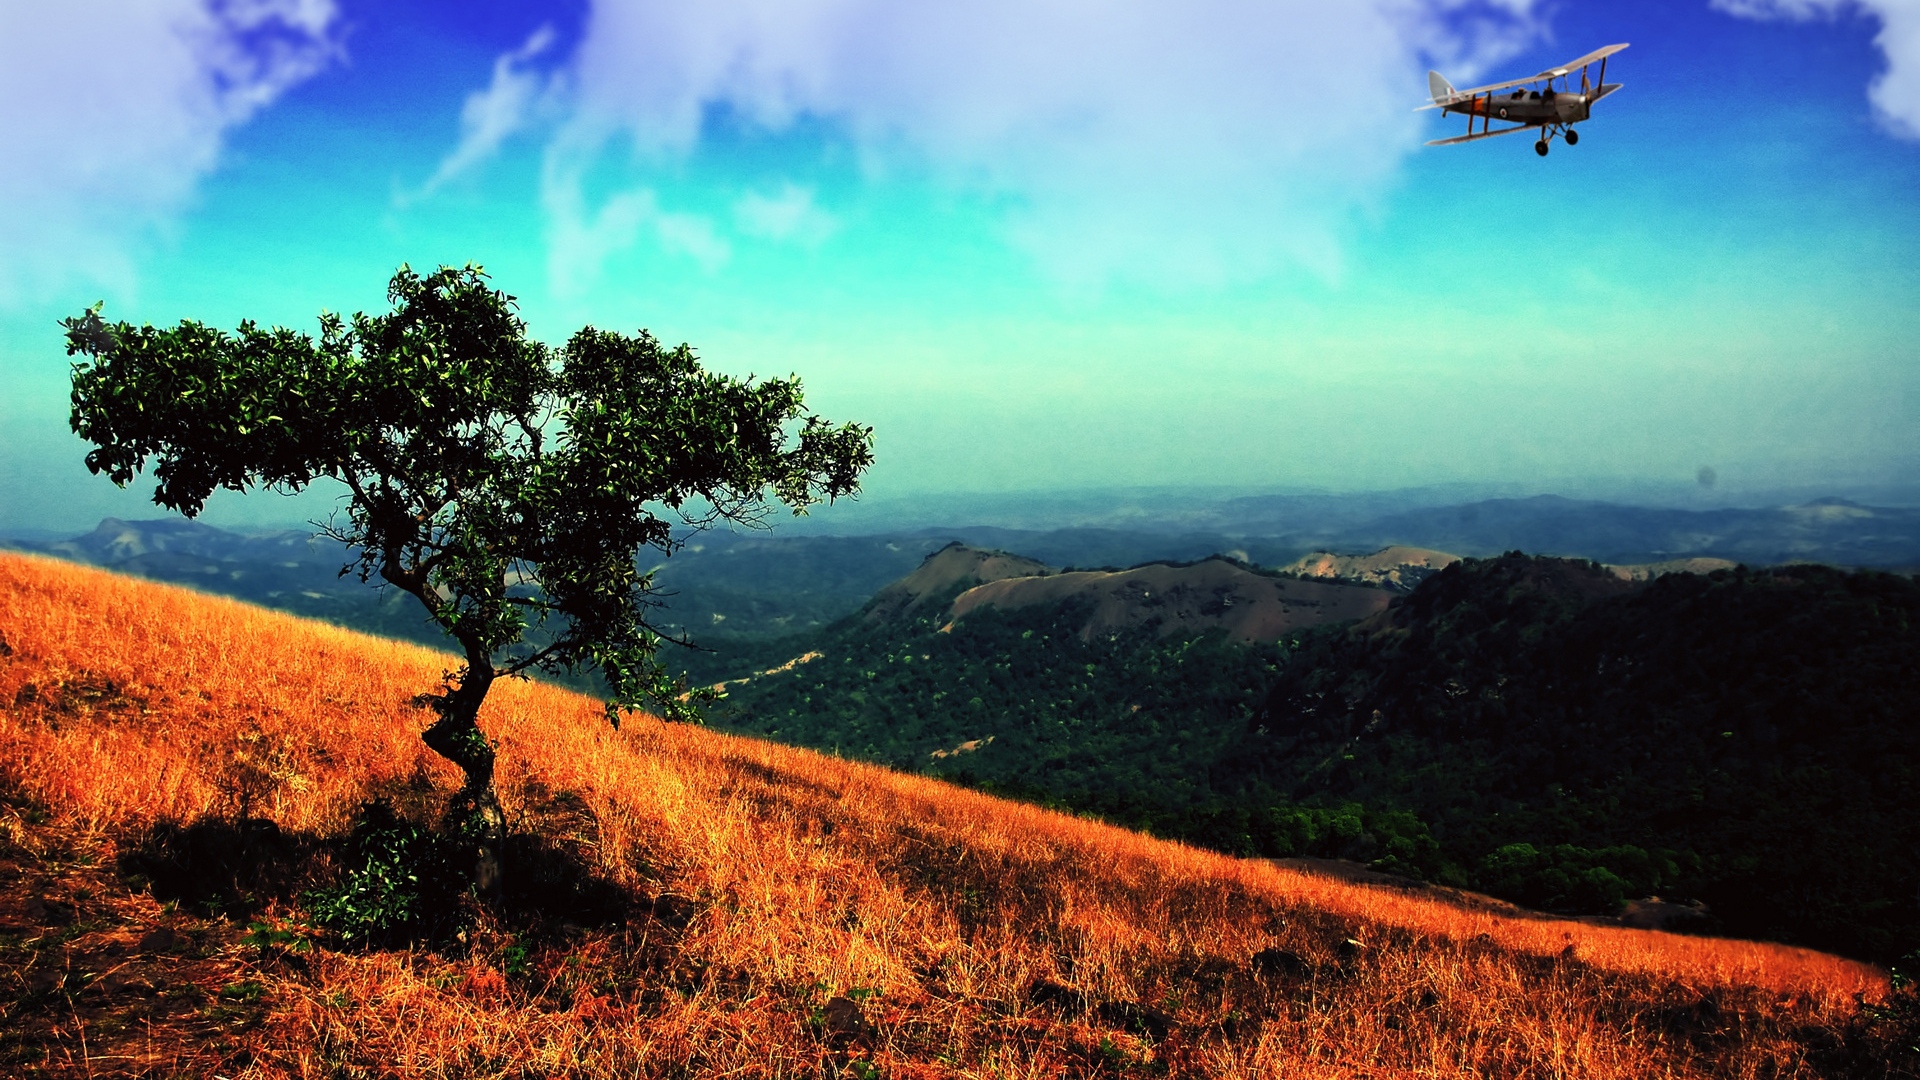 Download Wallpaper 1920x1080 tree, lonely, slope, plane, weeds ...